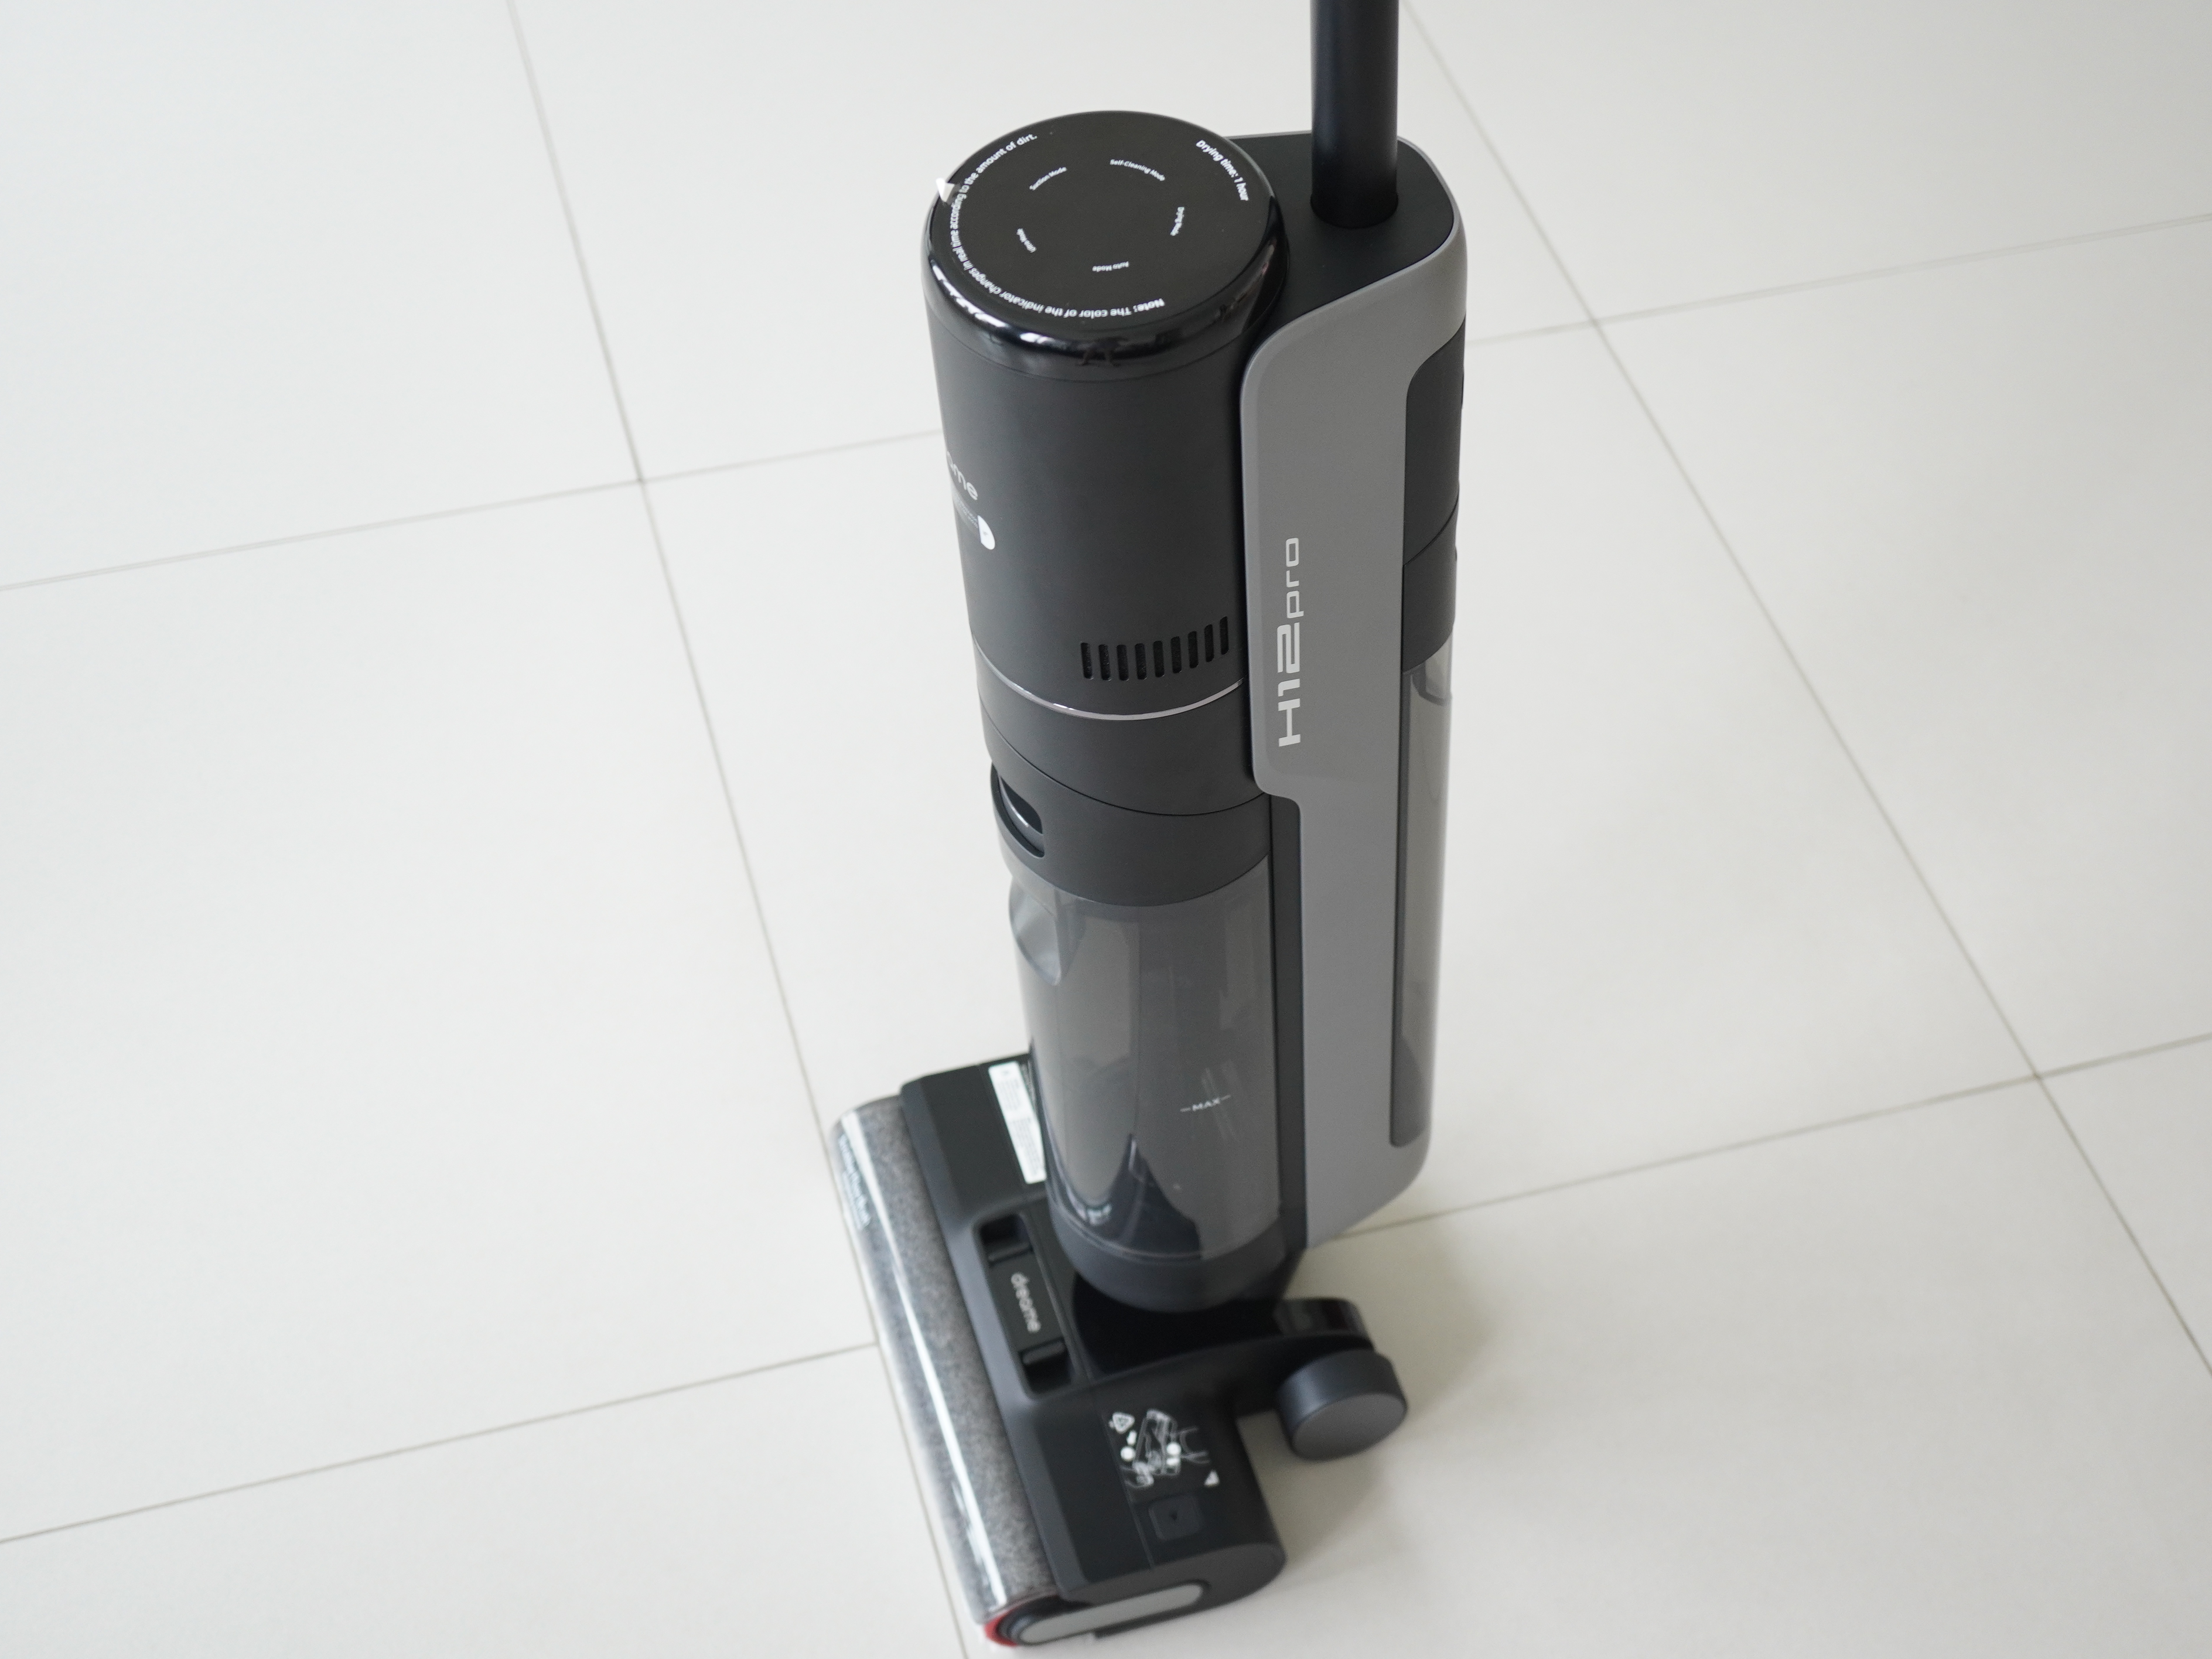 Dreame H12 Core review – A reliable wet and dry vacuum cleaner